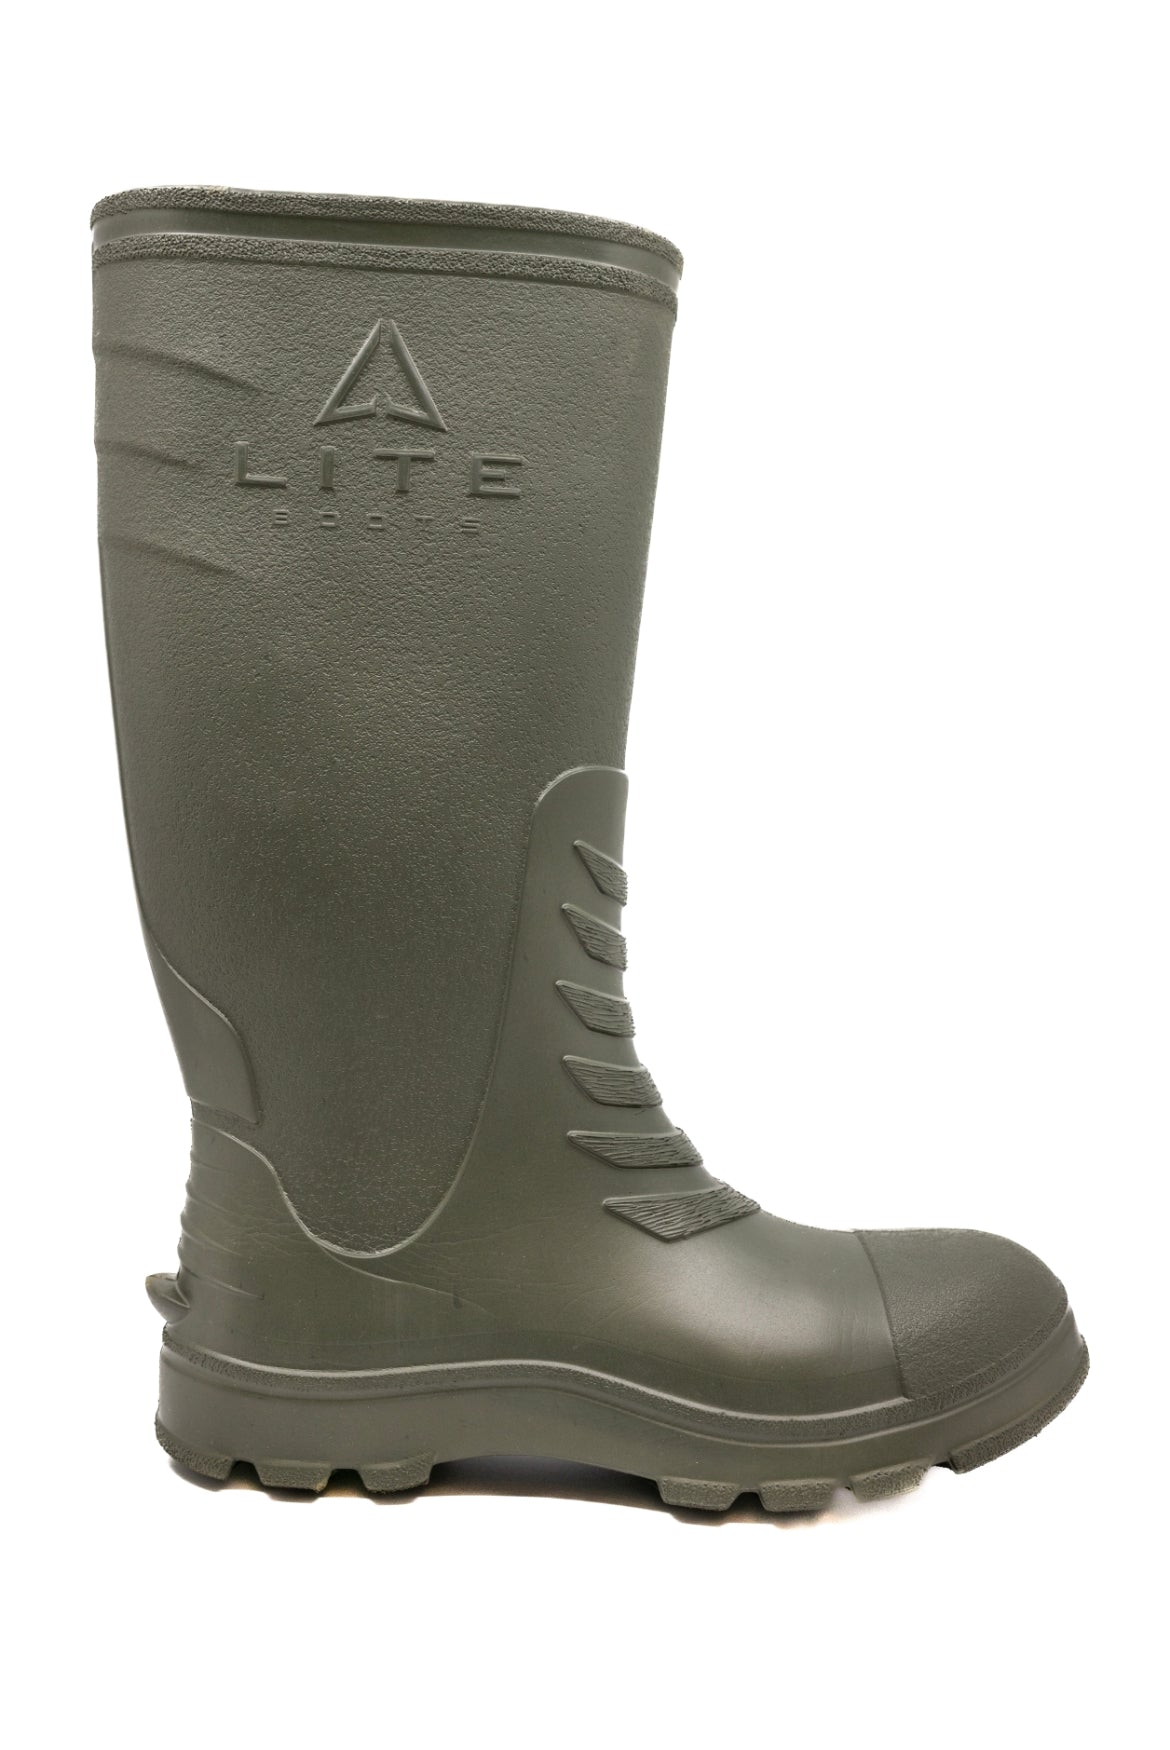 Lite Boots: Lightweight Hunting Boots